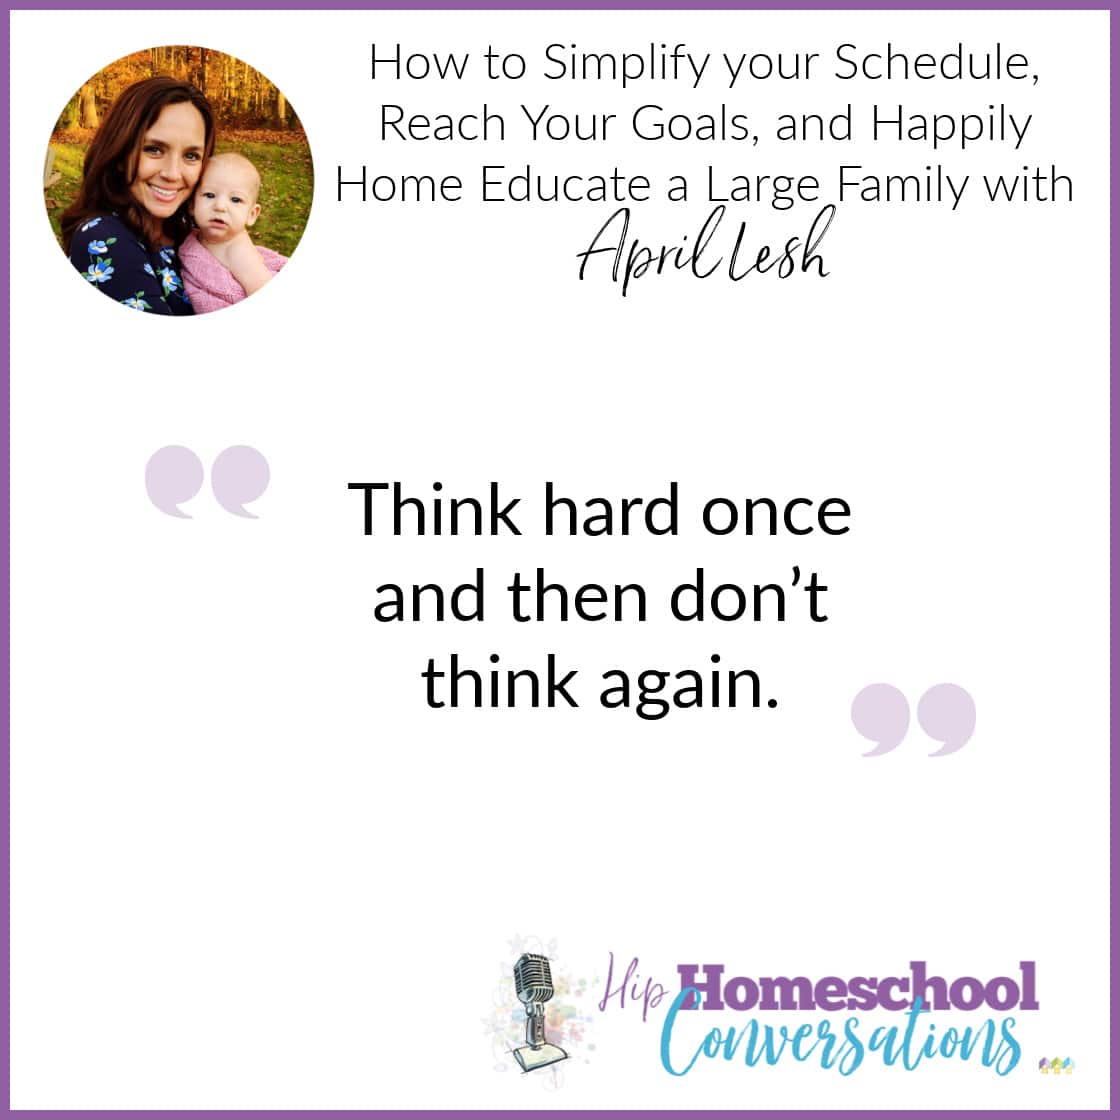 April shares her practical and thoughtful ideas regarding prioritizing her day, scheduling in a way that makes sense, and accomplishing her goal of encouraging her children to enjoy learning.